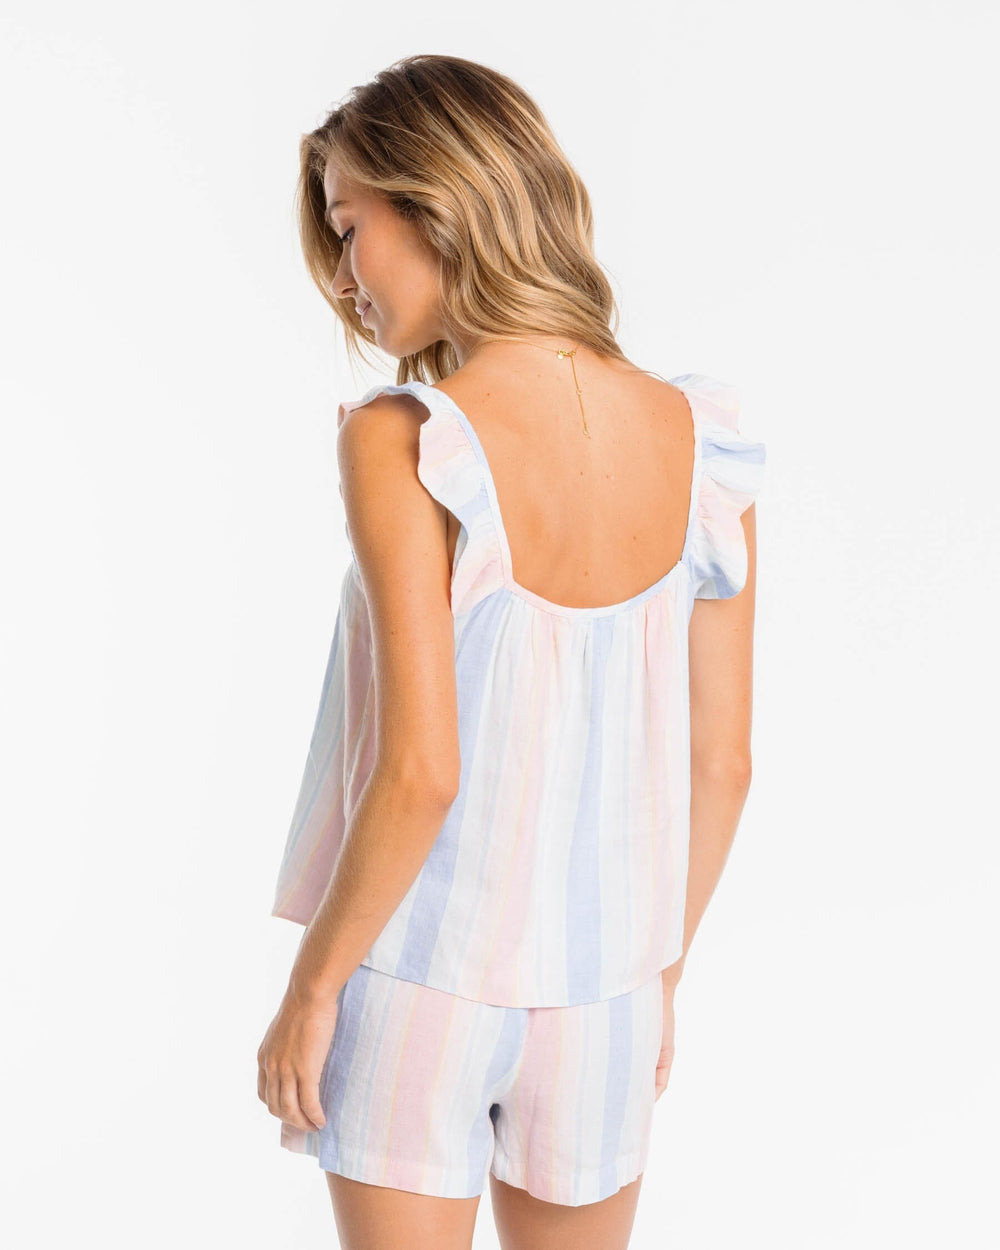 The back view of the Southern Tide Darcie Stripe Top by Southern Tide - Boat Blue